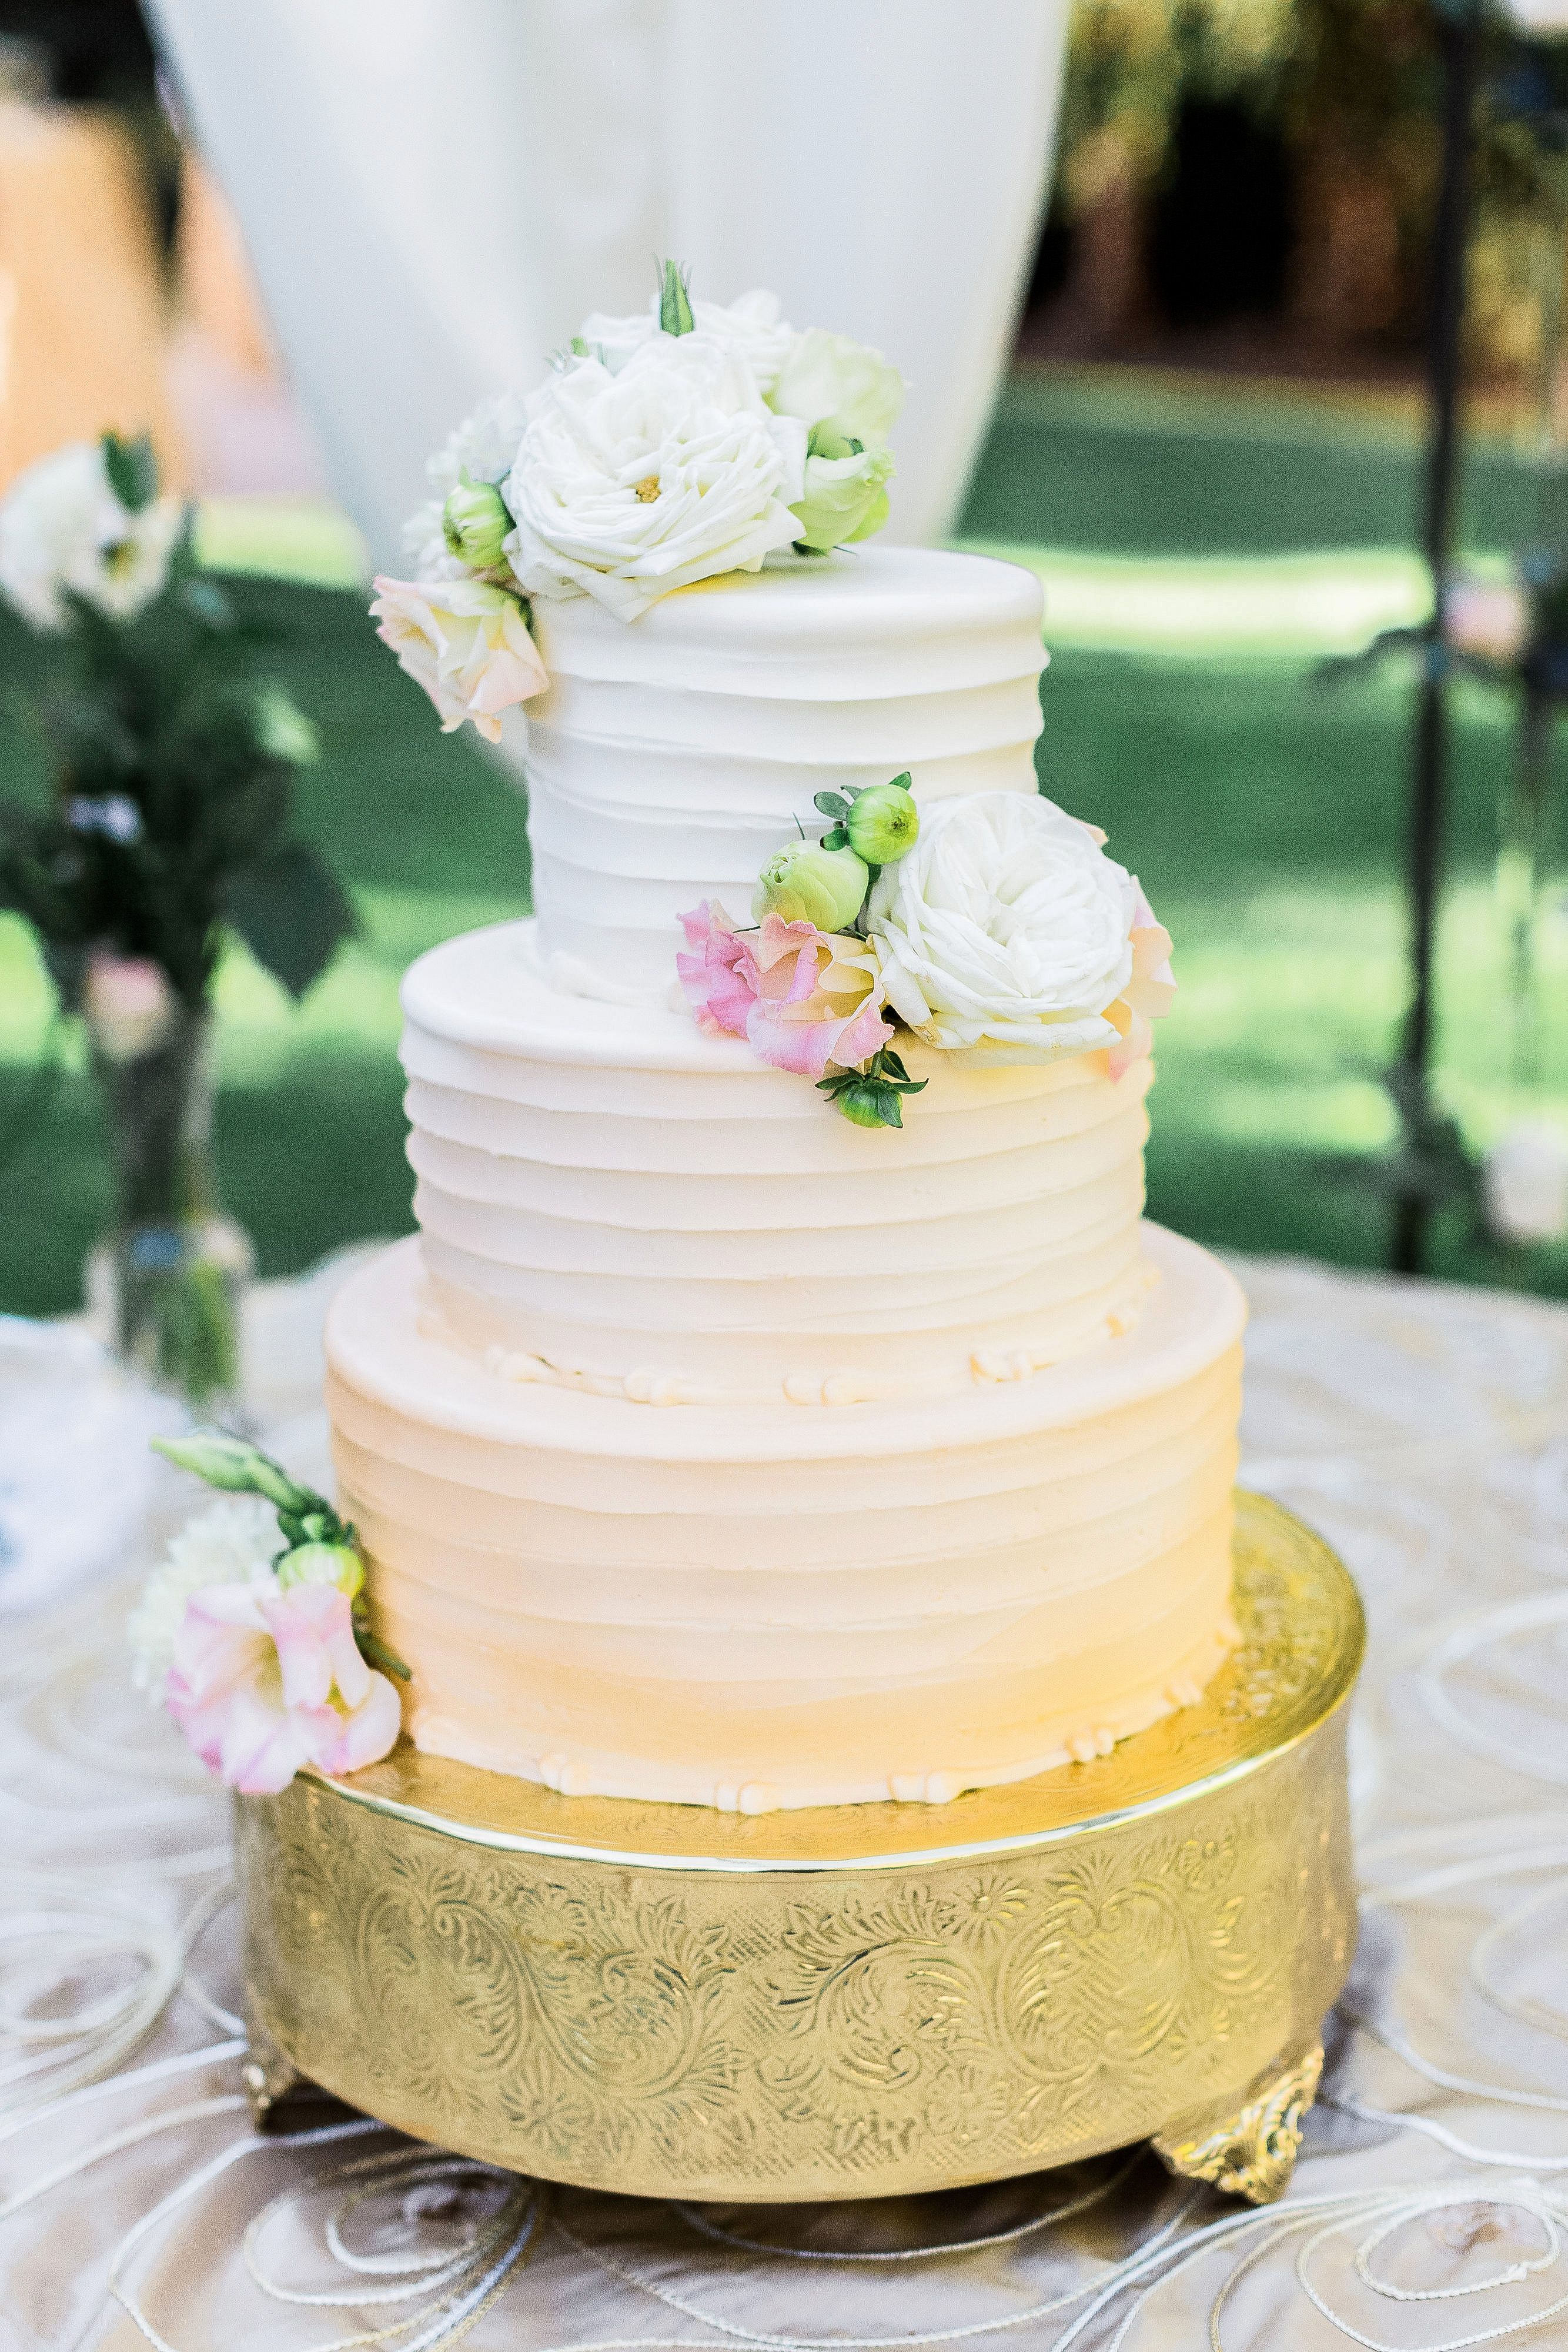 The Prettiest Ombré Wedding Cakes for Couples Who Love